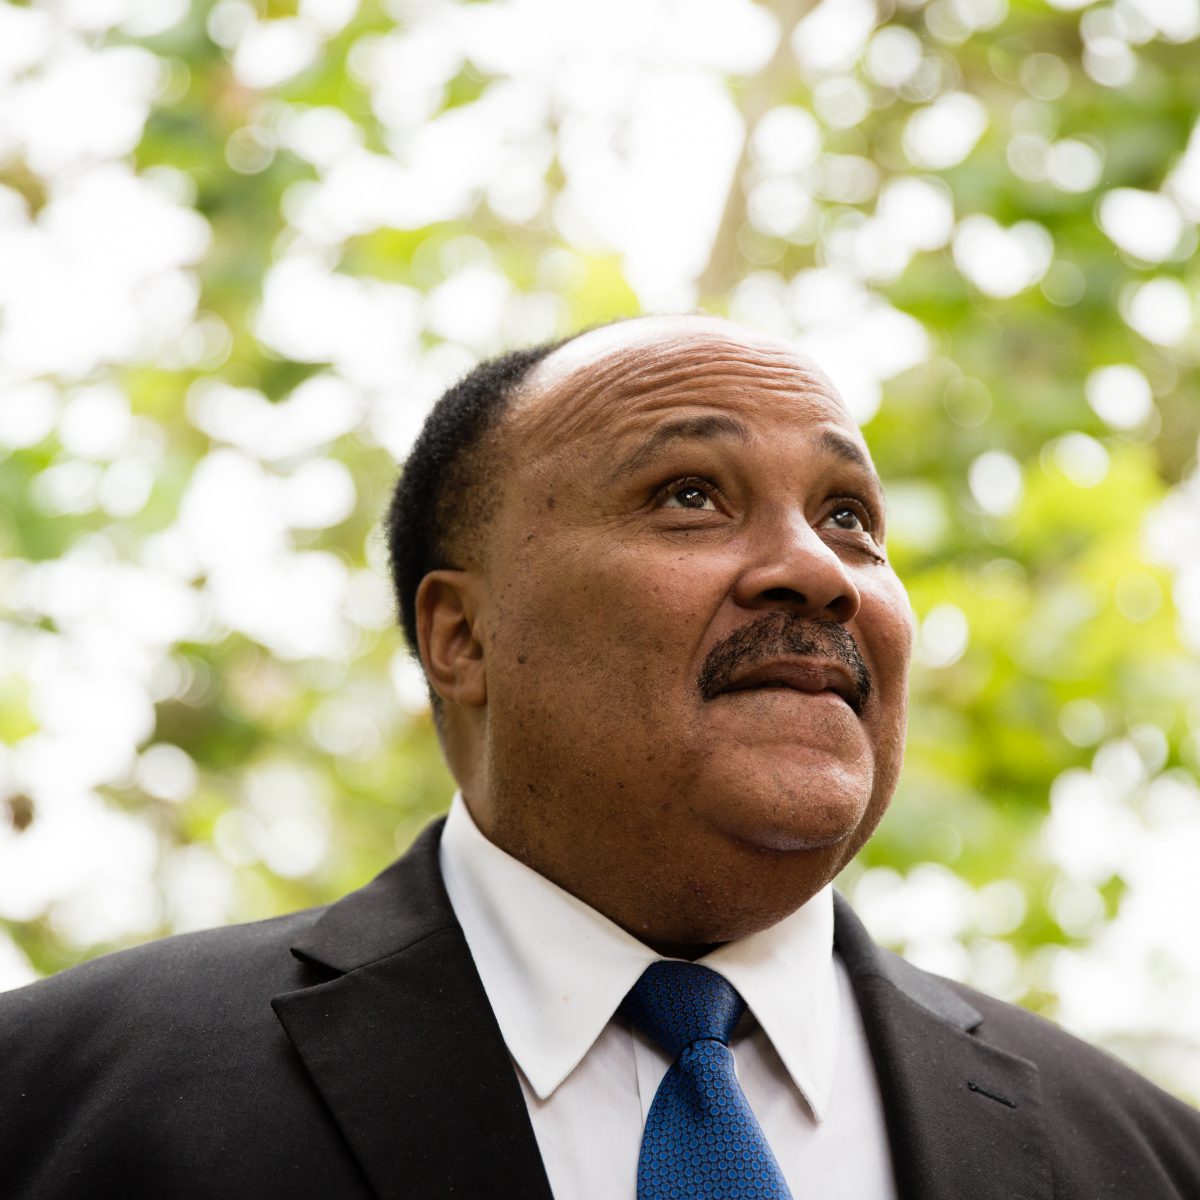 Martin Luther King III: Continuing the Legacy; The Civil Rights Struggles of the 21st Century